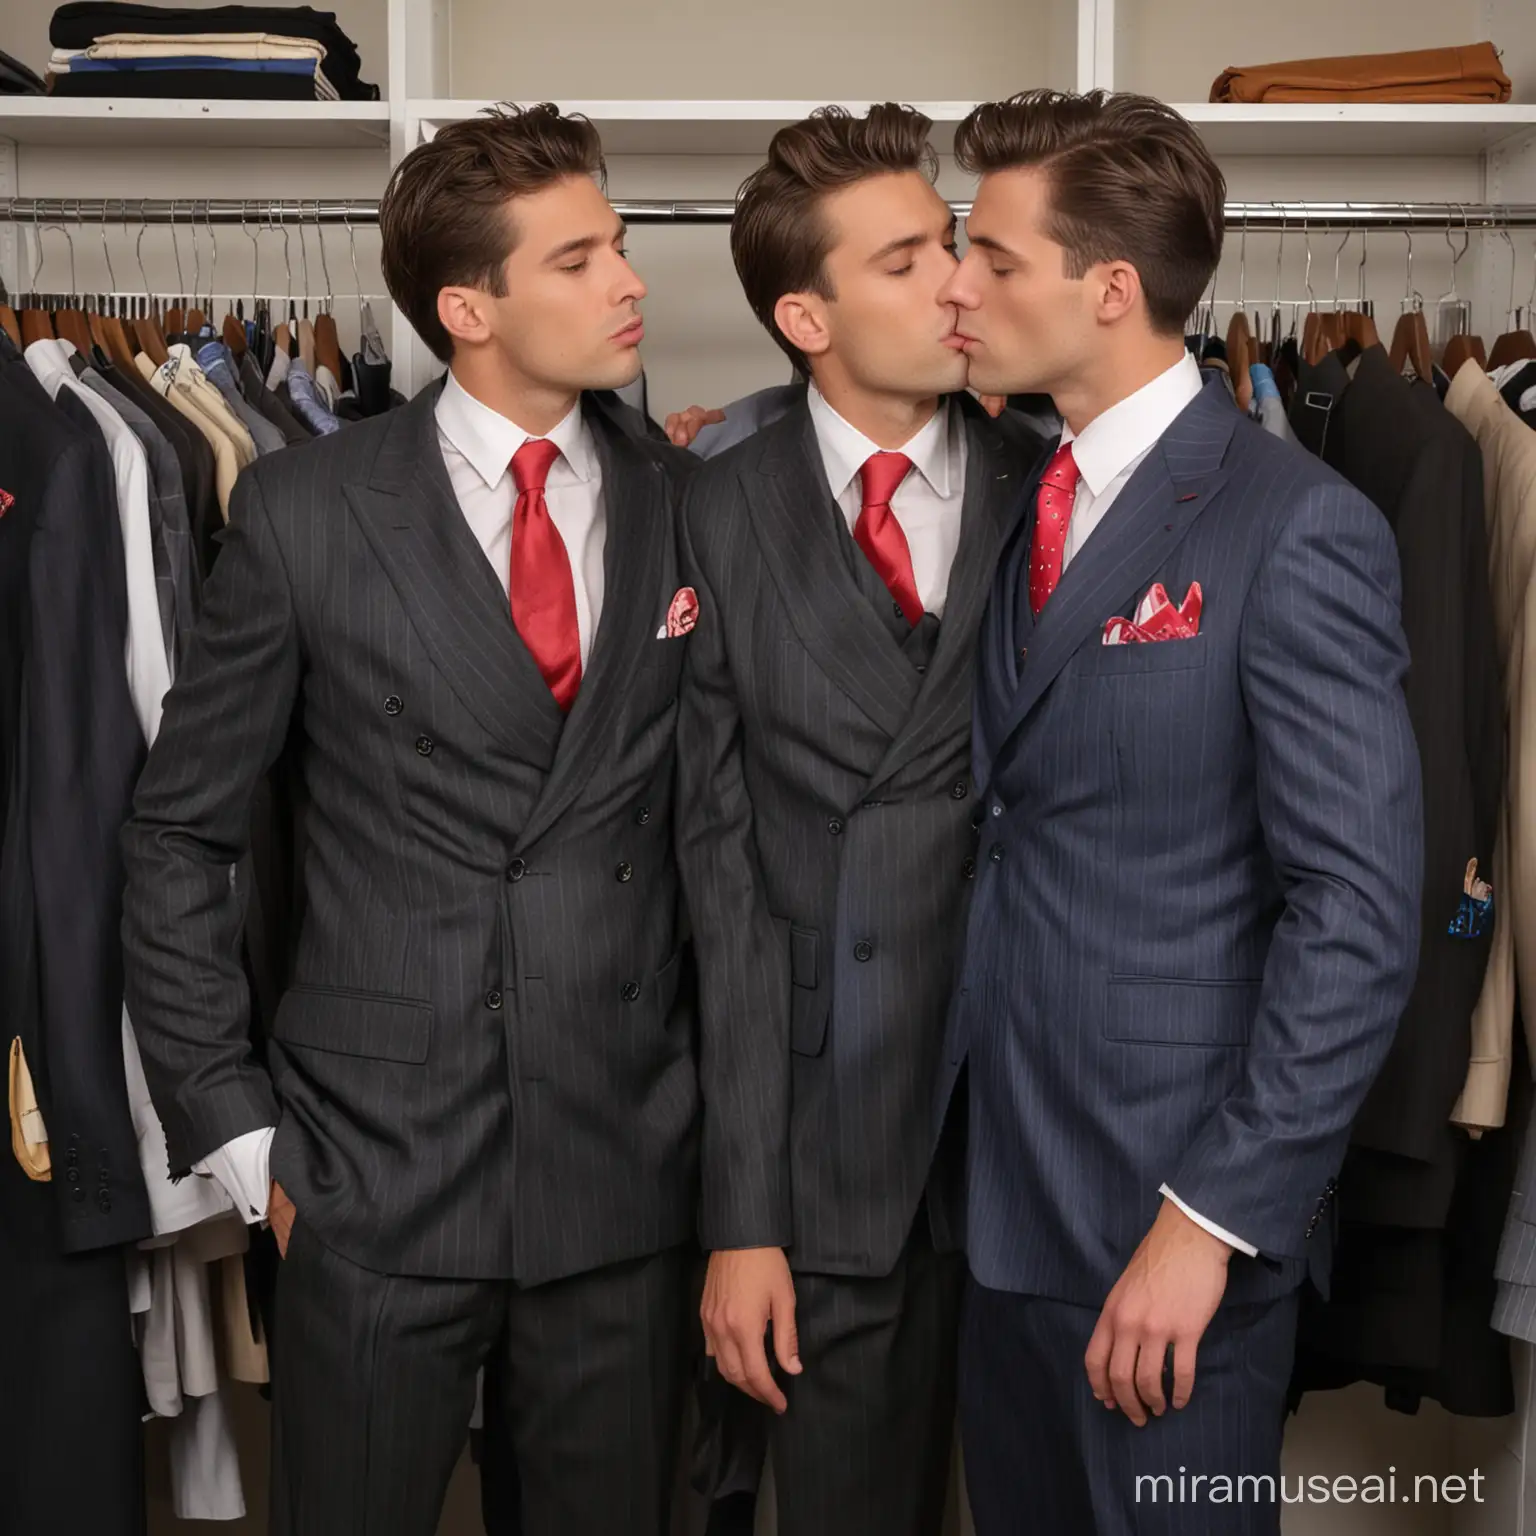 wide shot, three men, taking off pinstripe suit and bright tie, disheveled , very wide lapels, kissing his cheek, in a gentlemen's closet , lots of suits on racks, photographic, high resolution
